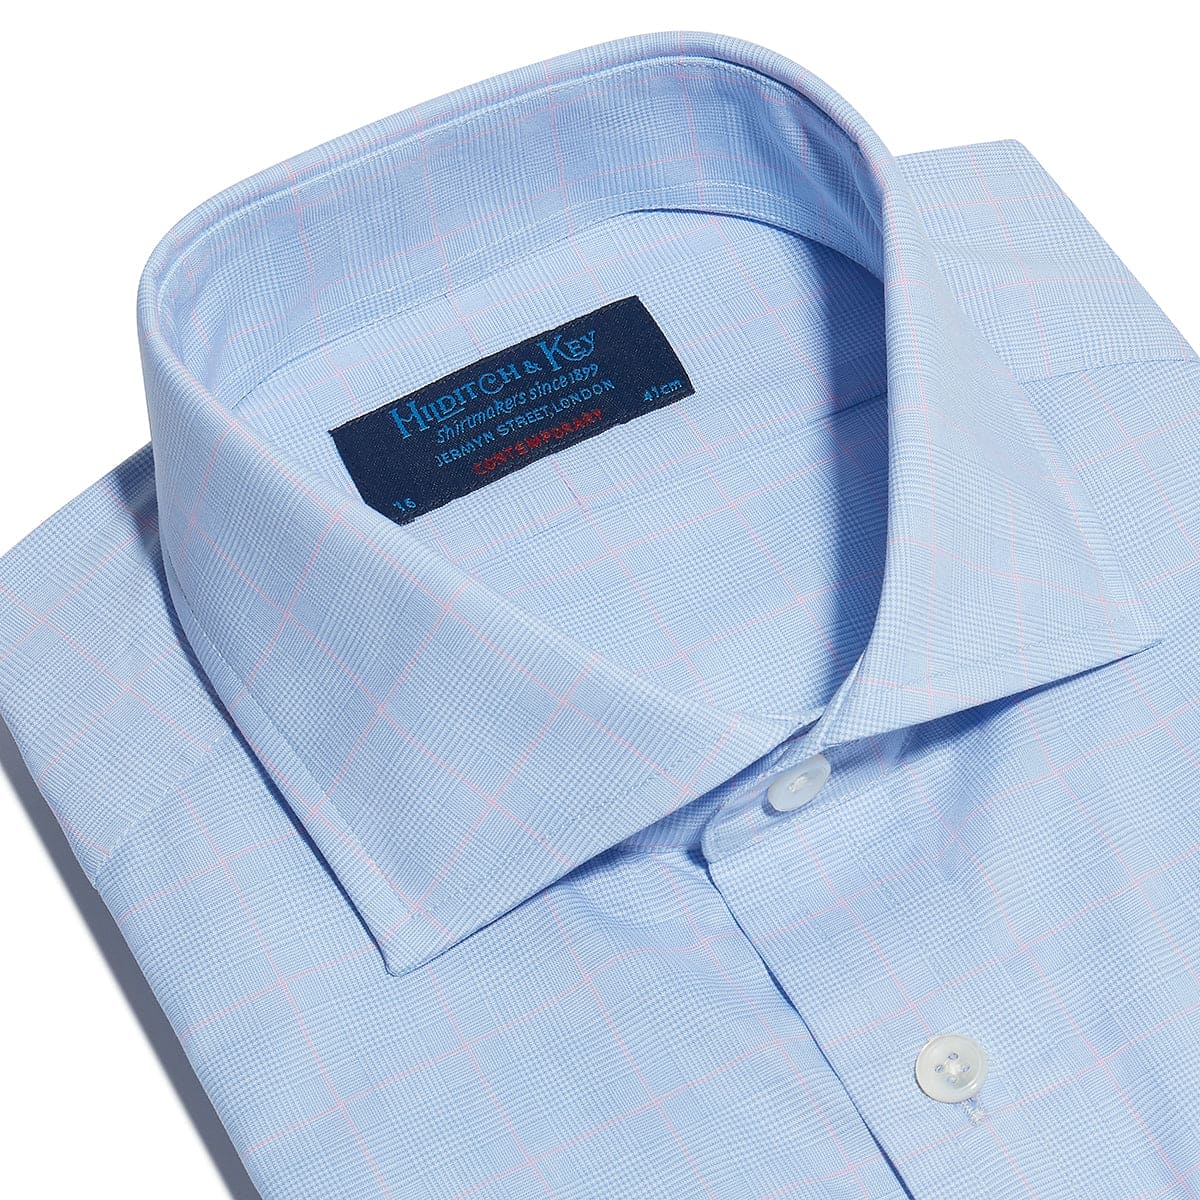 Contemporary Fit, Cutaway Collar, Double Cuff in Blue With Pink Line Overcheck